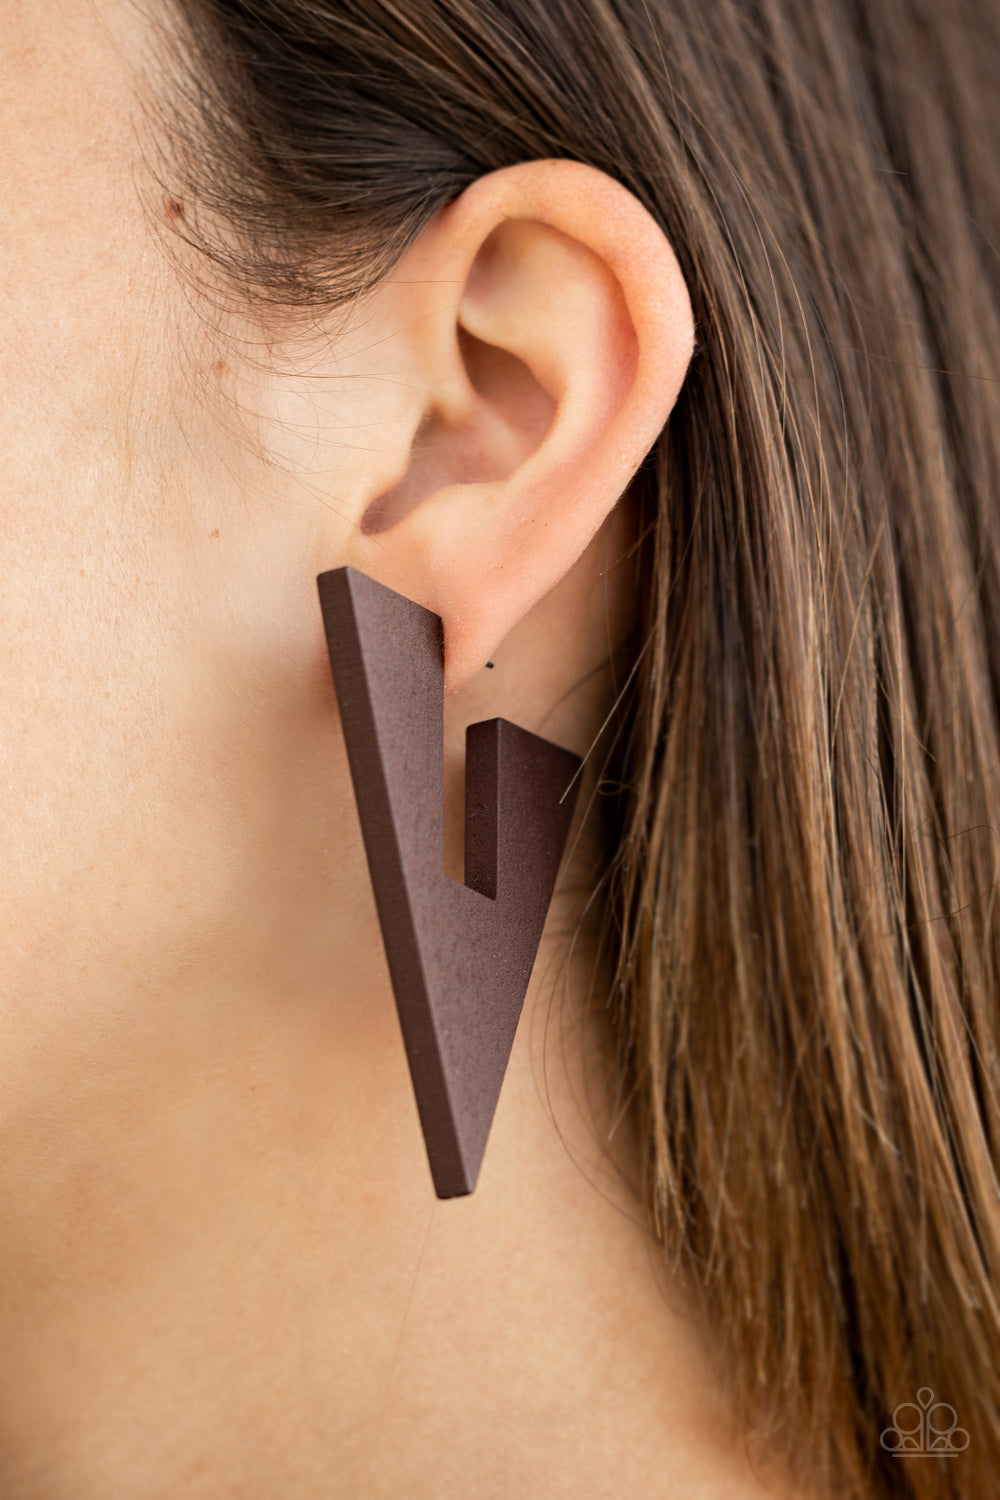 Painted in an earthy brown finish, a wooden frame is cut into an edgy triangular shape for a retro vibe. Earring attaches to a standard post fitting. Hoop measures approximately 1 1/2